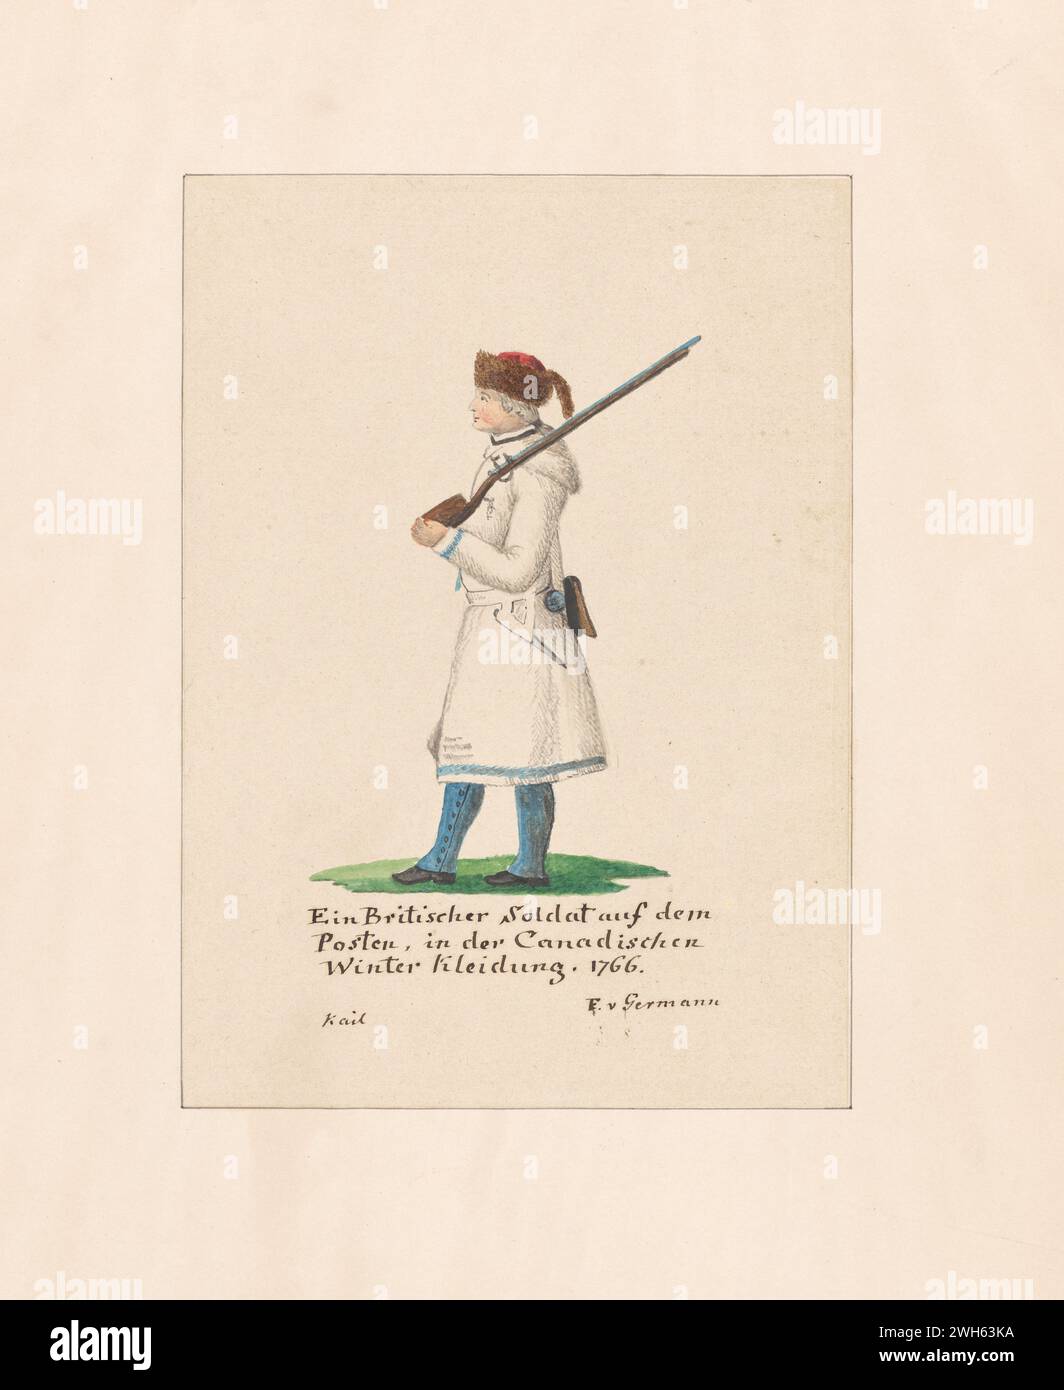 “Watercolor of a British Soldier dress in Canadian winter uniform during the American Revolutionary War” . From a series of prints by Friedrich von German captain of a regiment from Hesse-Hanau, one of the many German auxiliary troops hired by George III to fight in the American Revolution. He arrived in North America in 1775 During the war, he painted a series of watercolors of American, British, and German soldiers. Stock Photo